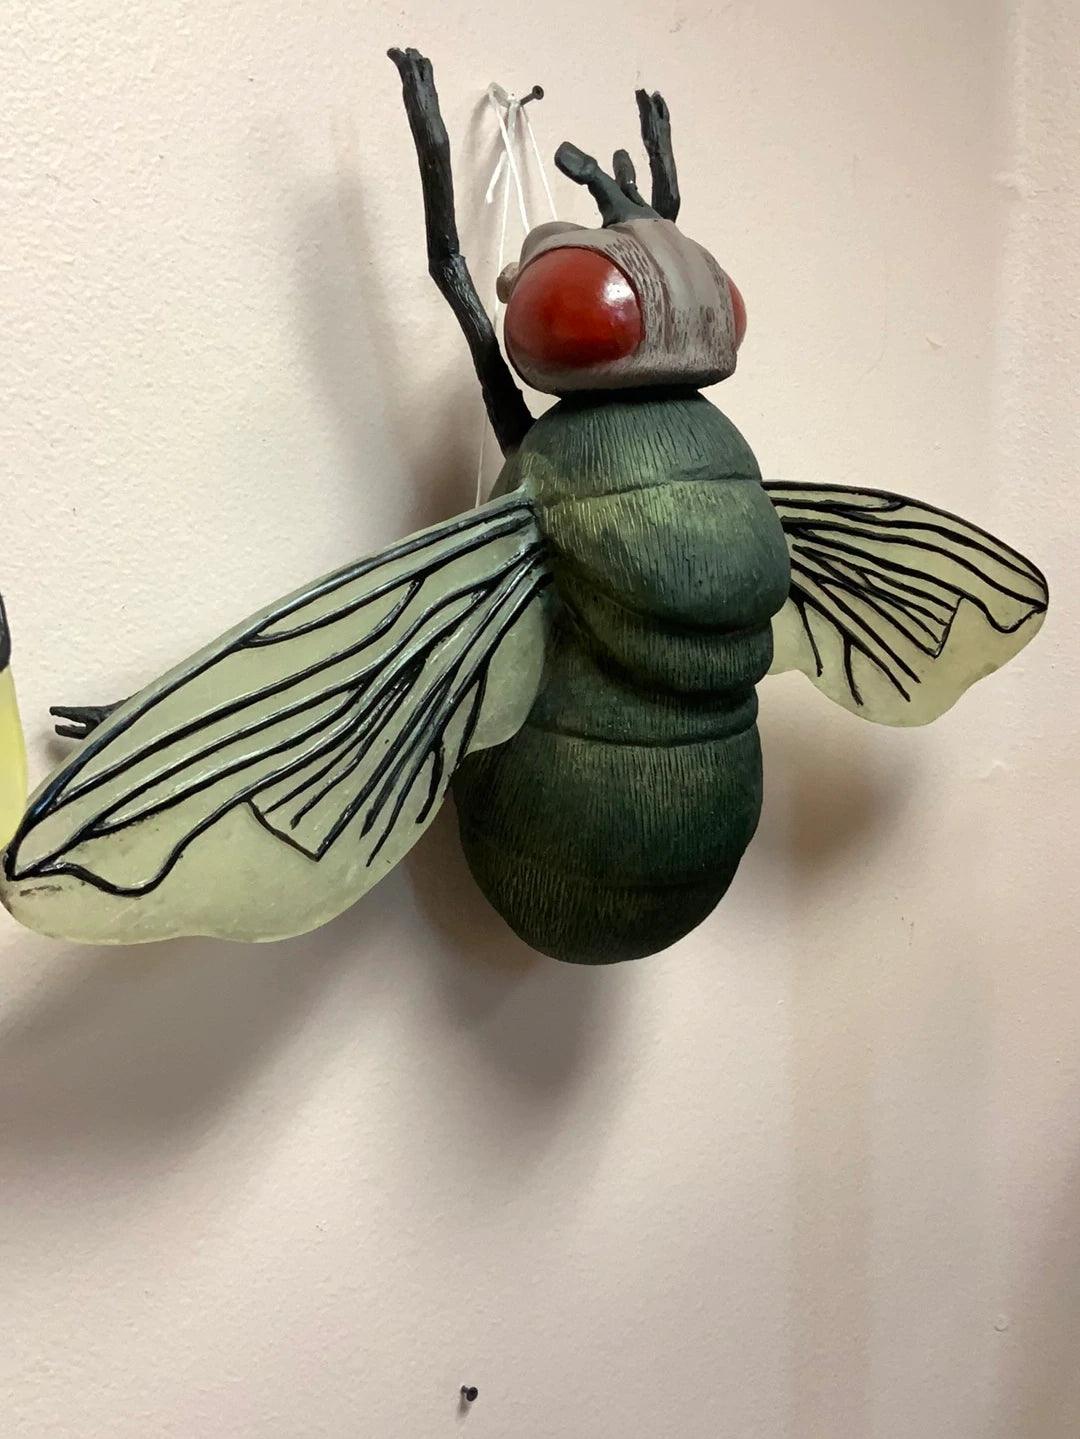 Fly Statue